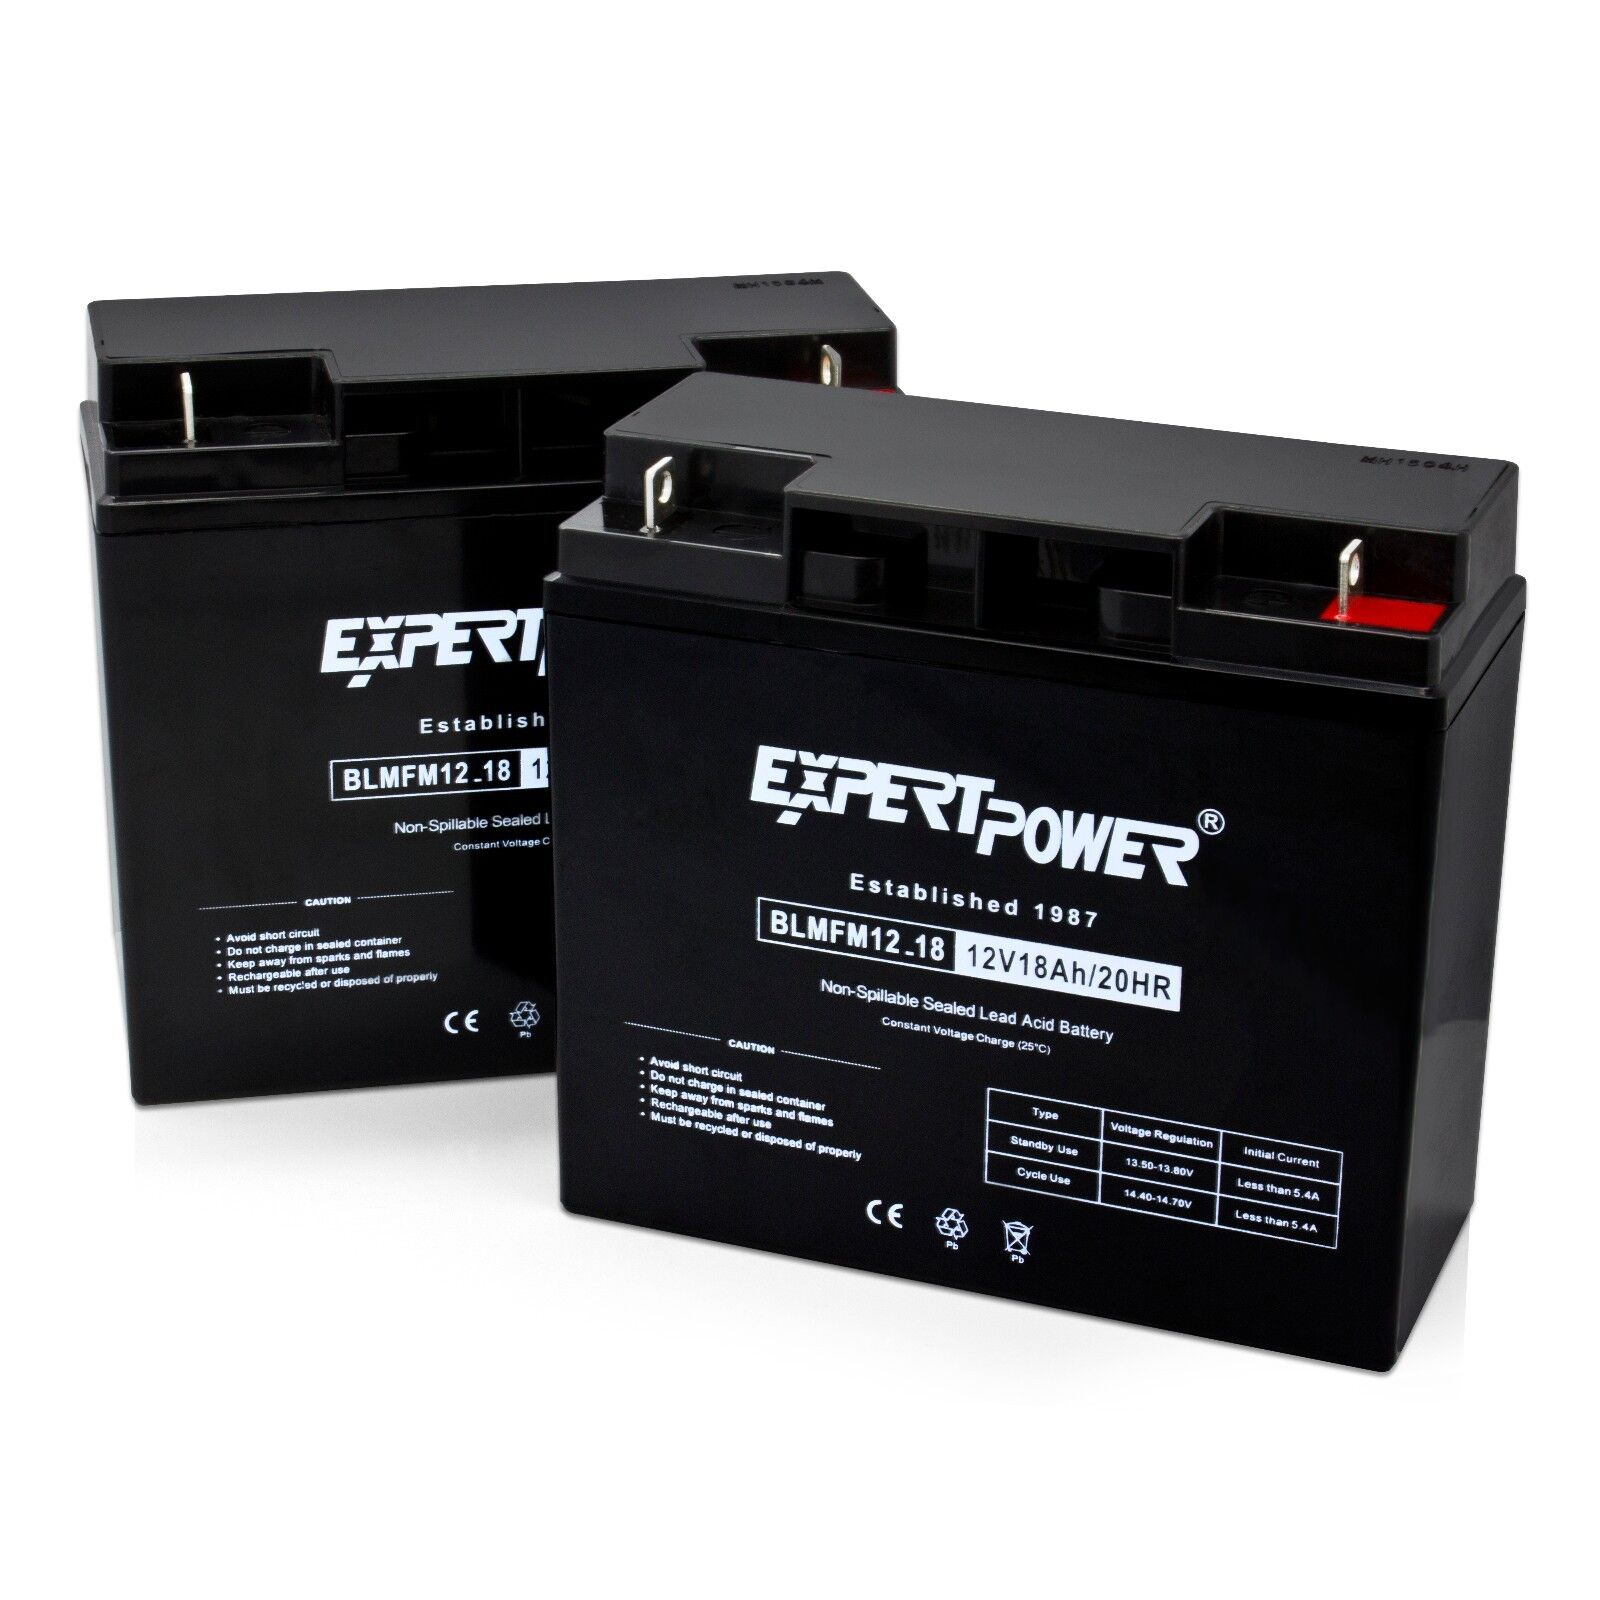 2 EXP12180 12V 18AH Battery for APC SmartUps 1400 1500 [Replacement for UB12180] ExpertPower EXP12180 - фотография #2